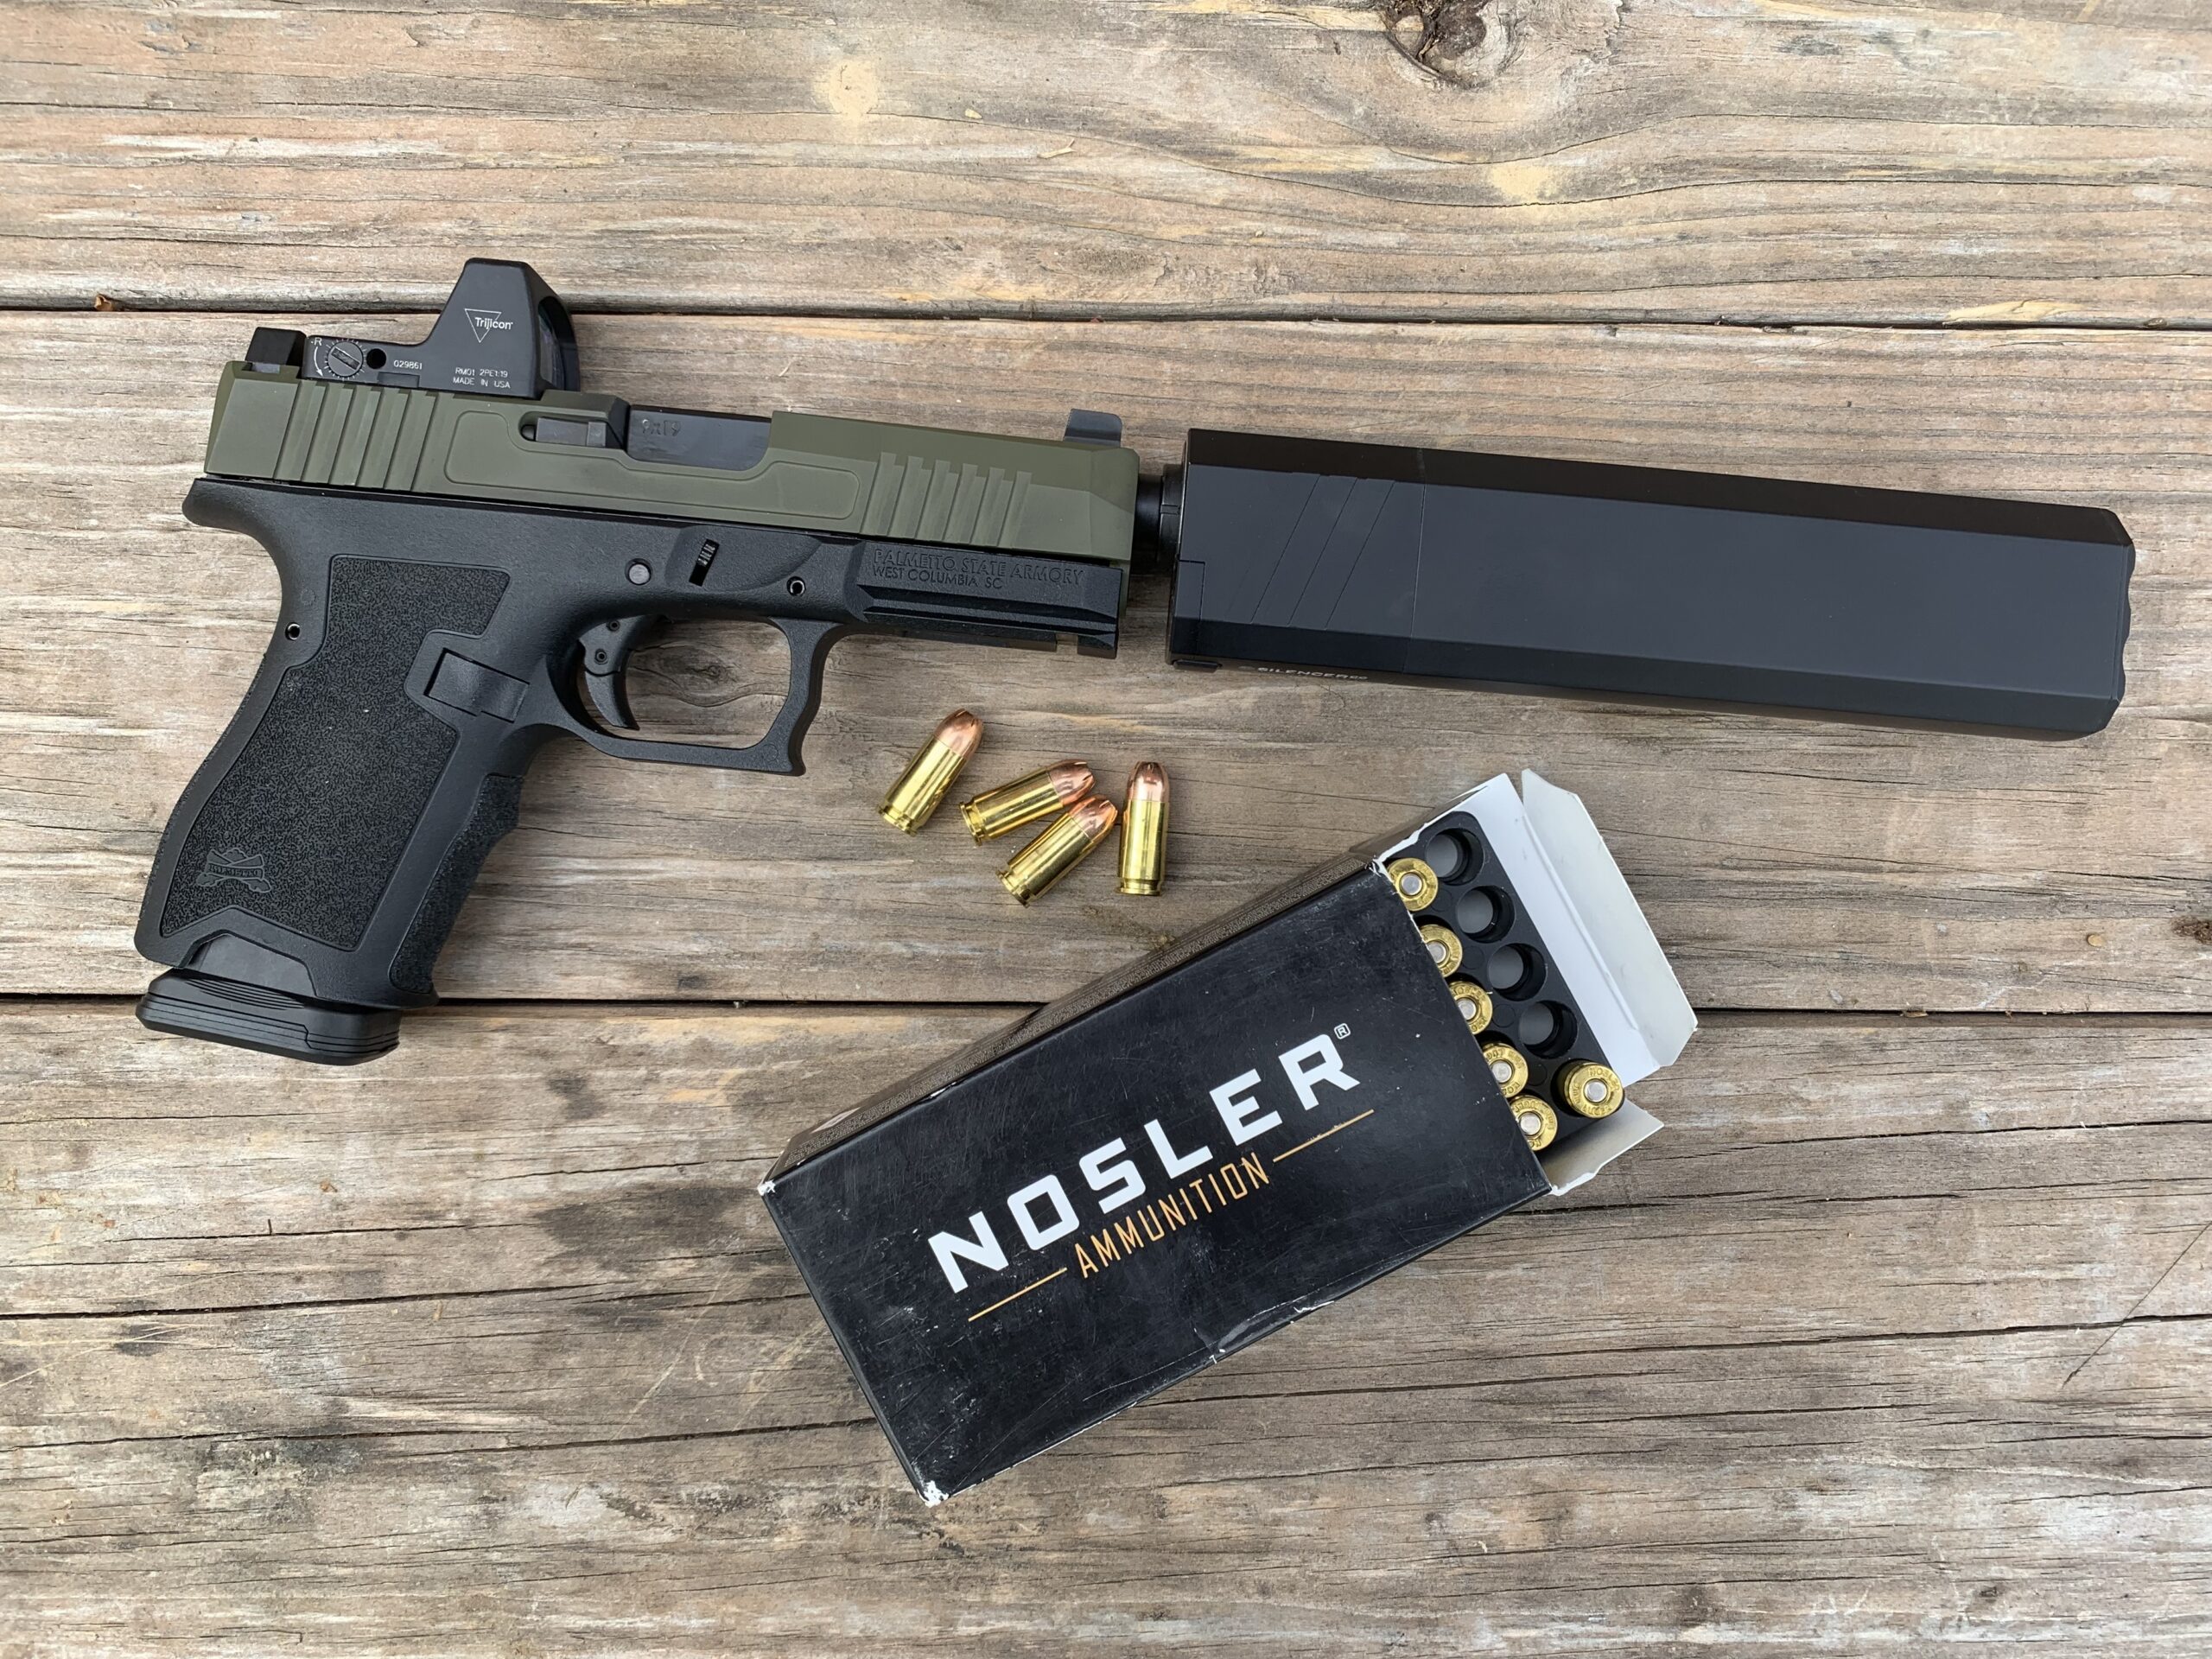 PSA Dagger Review: An Affordable Glock Clone Put to the Test